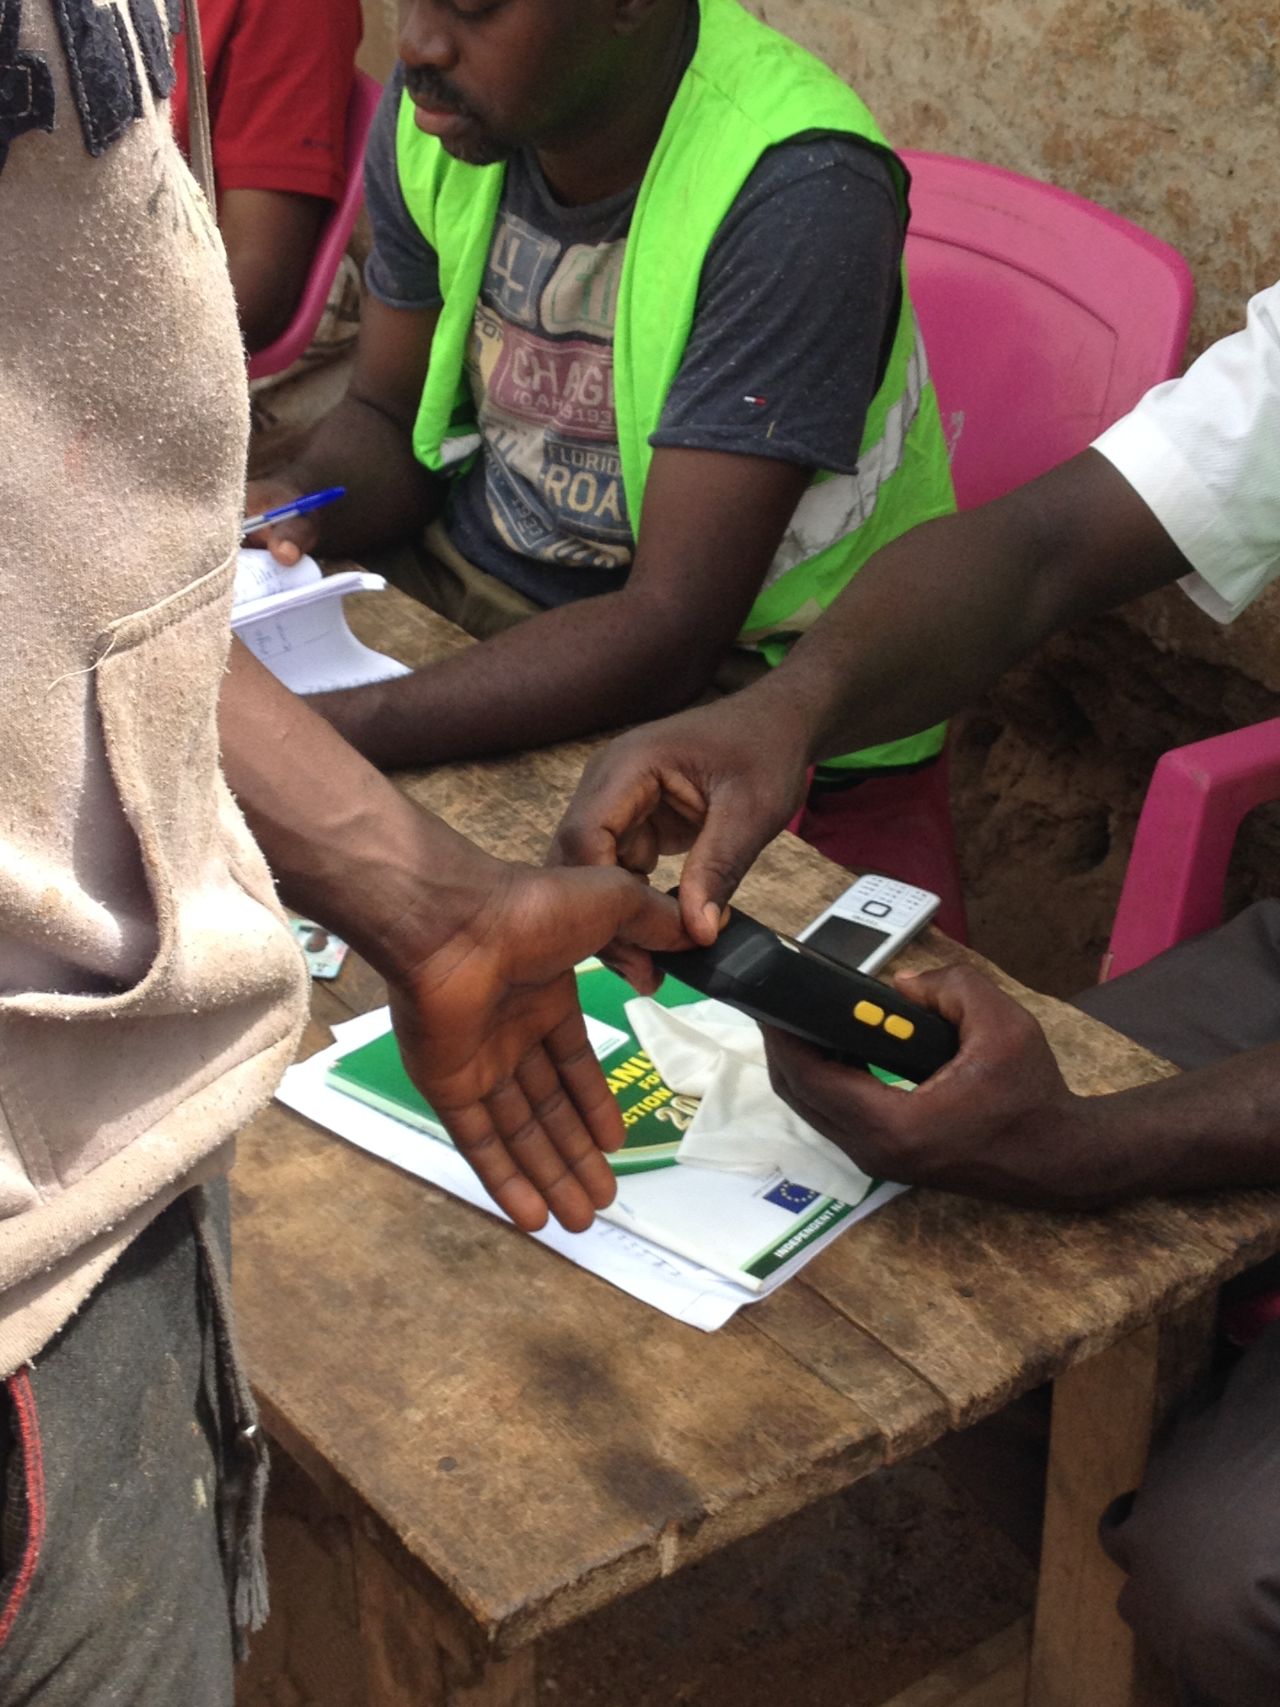 Election officials test voter card readers in preparation for the upcoming elections. "The introduction of the card readers is expected to reduce the possibility of electoral fraud and election rigging, and to further build the confidence of voters in the electoral process," explains YIAGA Program Manager, Cynthia Mbamalu.